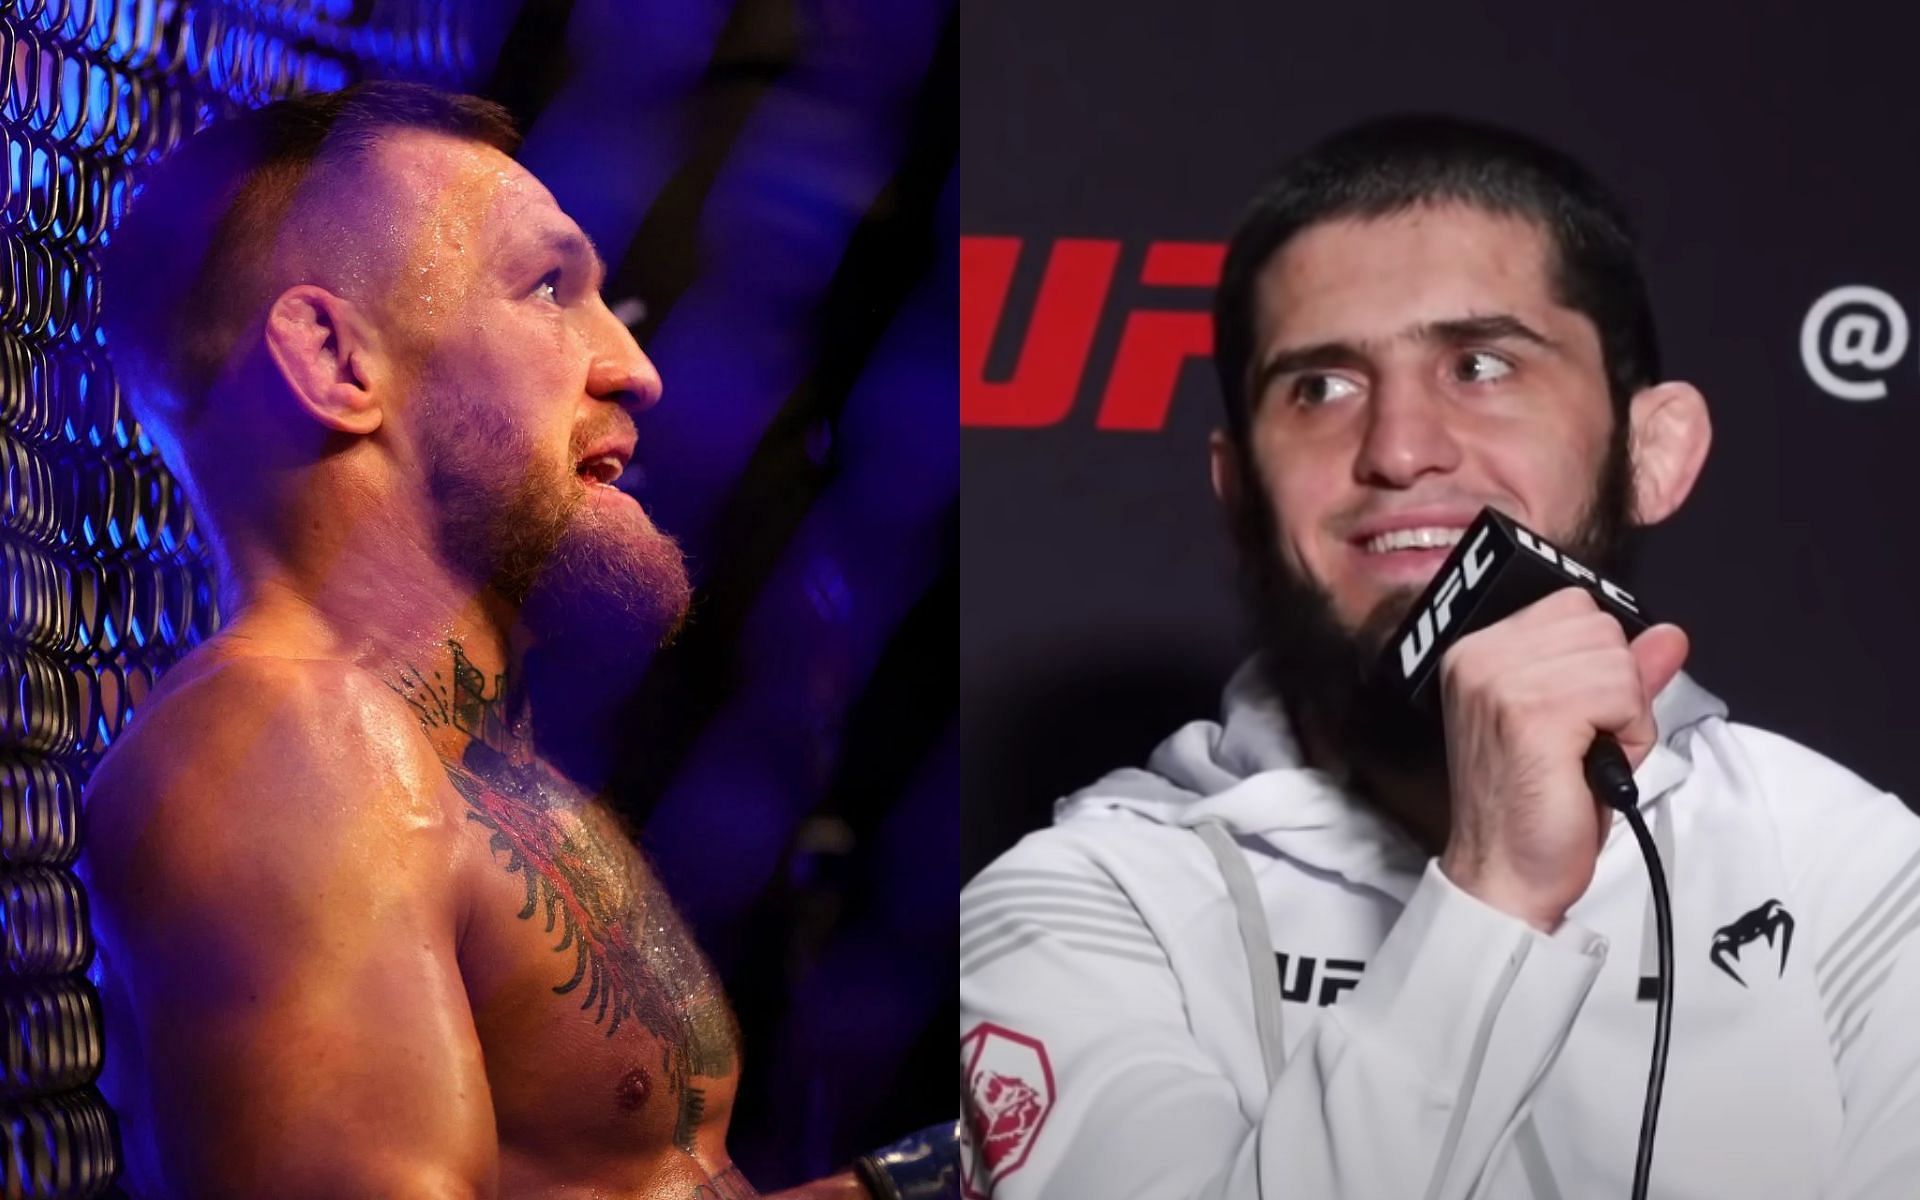 Conor McGregor (left), Islam Makhachev (right) [Images courtesy of MMA Junkie on YouTube]